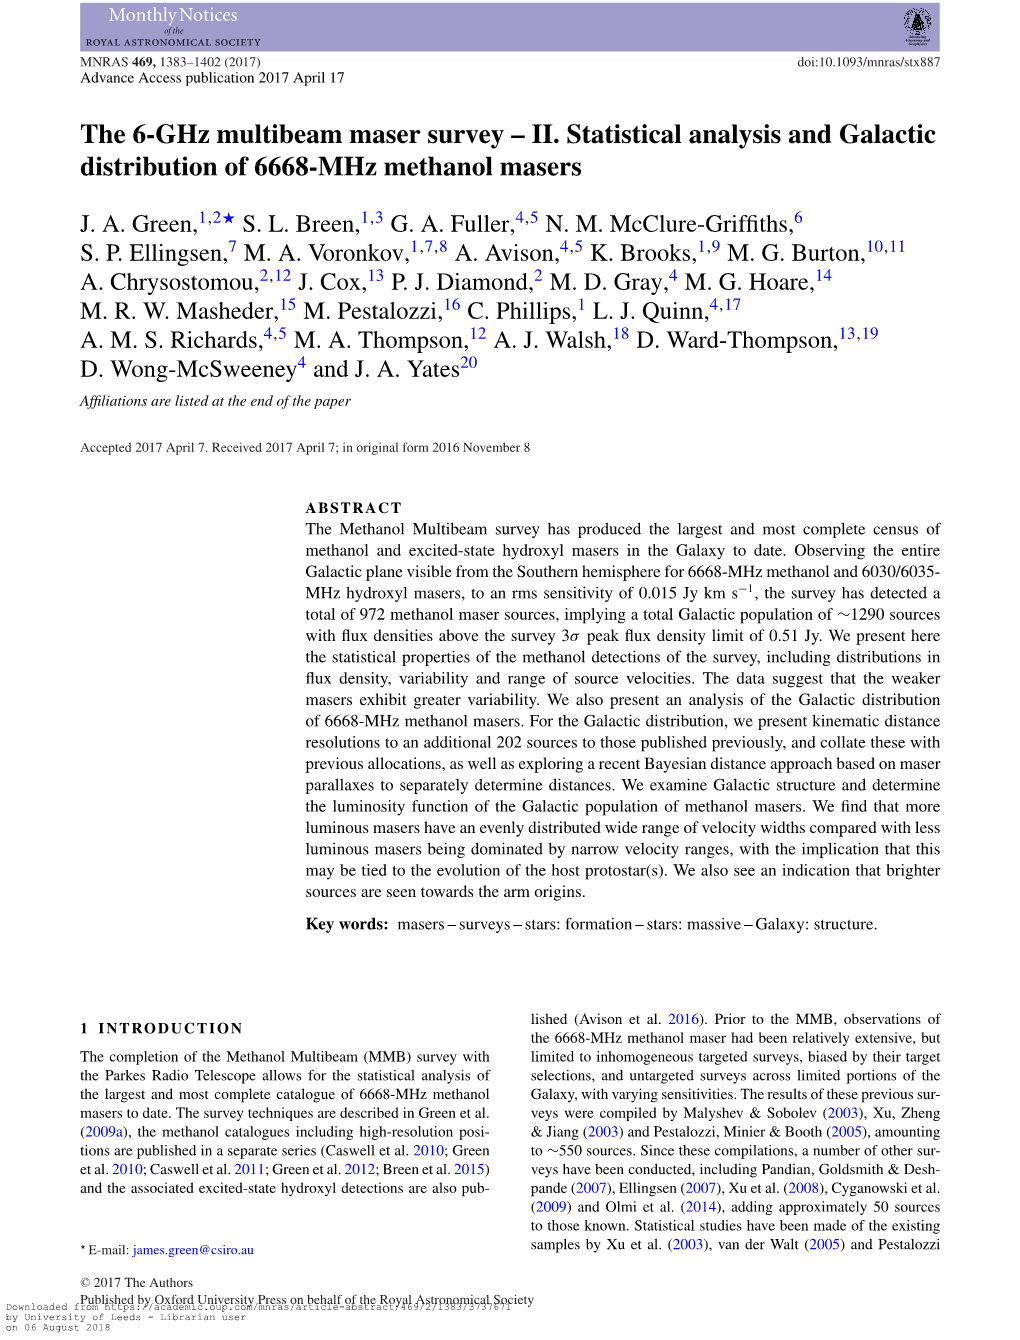 II. Statistical Analysis and Galactic Distribution of 6668-Mhz Methanol Masers